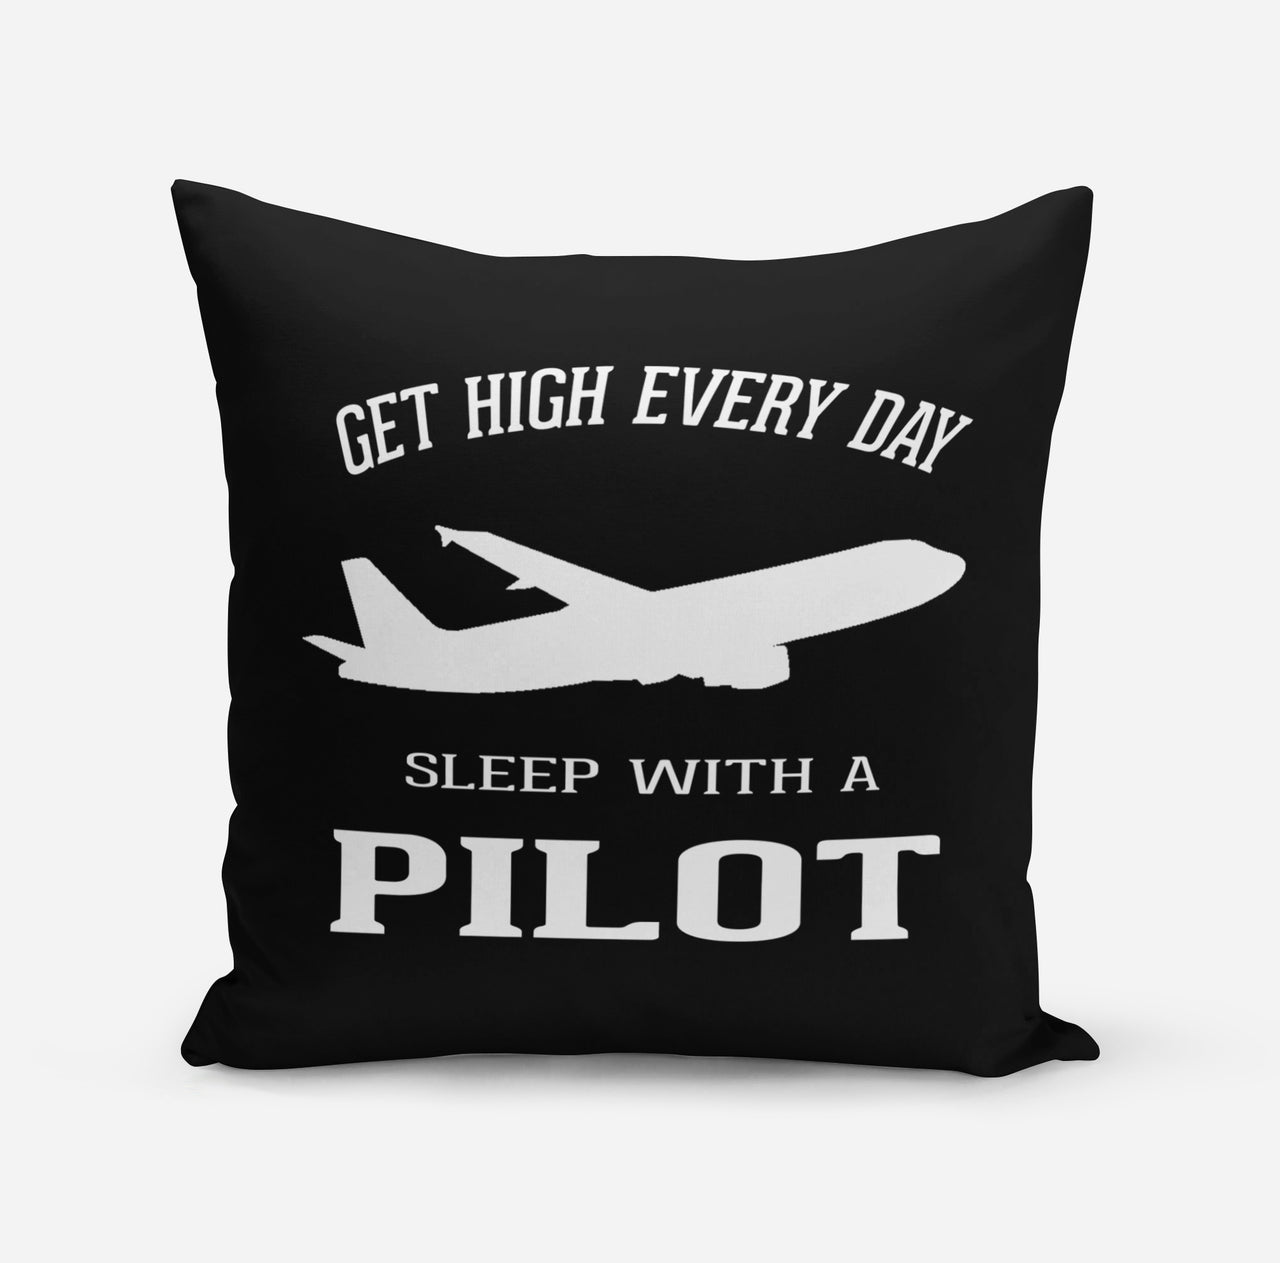 Get High Every Day Sleep With A Pilot Designed Pillows